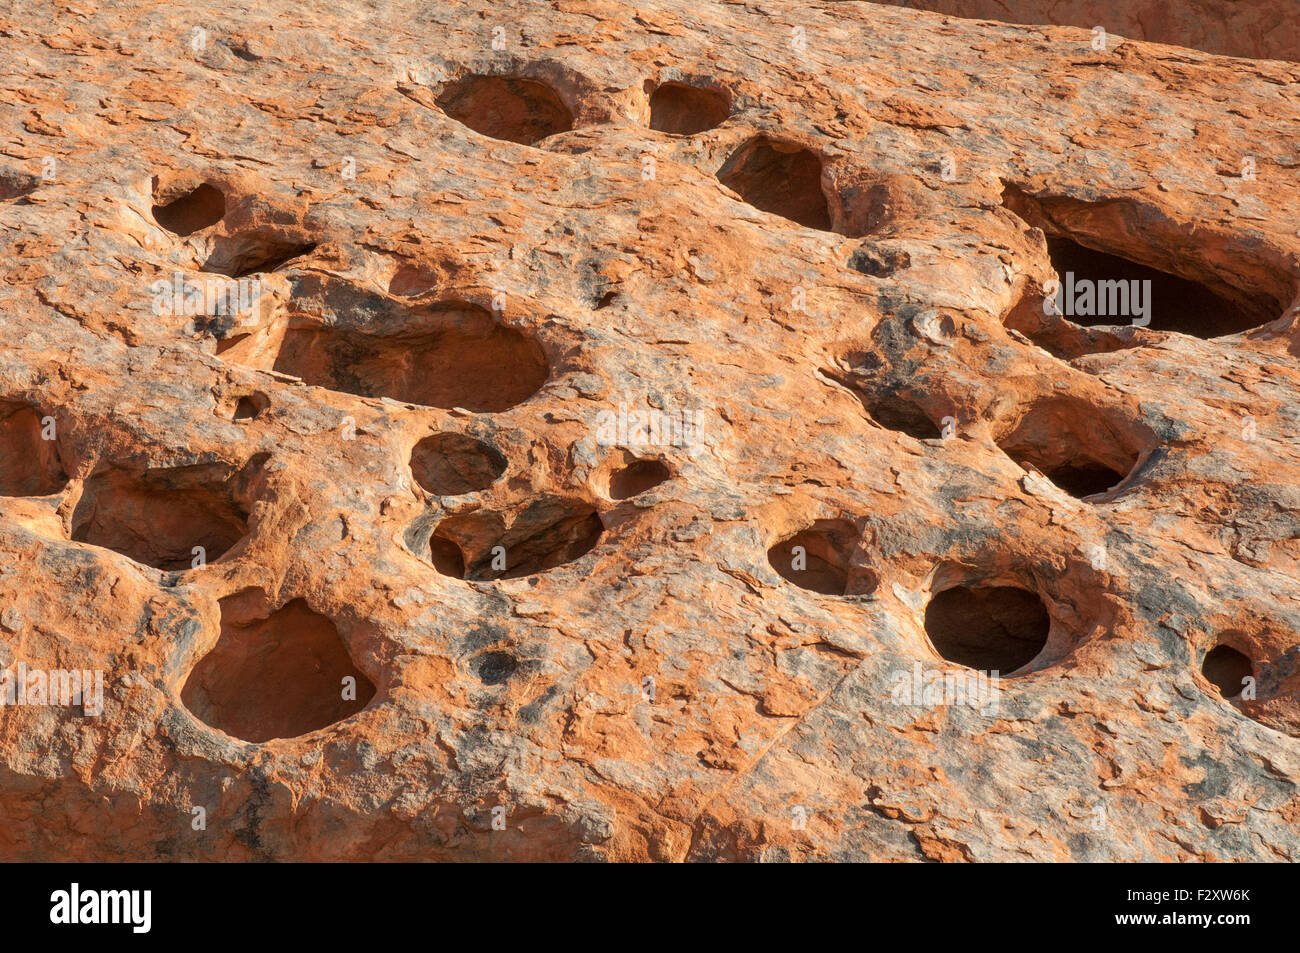 Pitted surface of Uluru or Ayers Rock, Central Australia Stock Photo